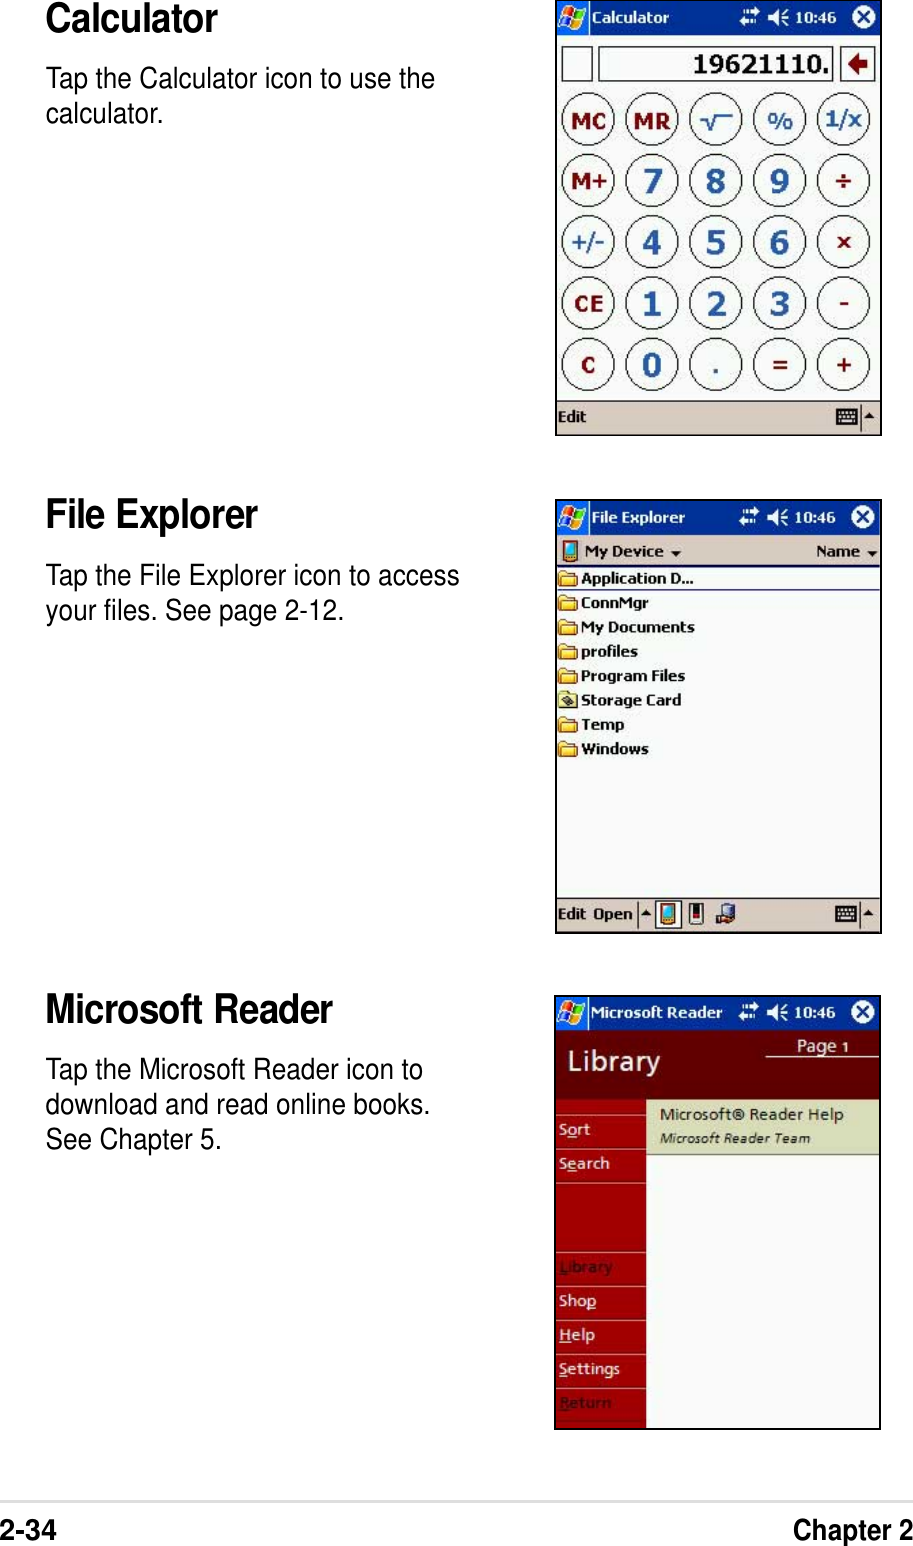 2-34Chapter 2CalculatorTap the Calculator icon to use thecalculator.File ExplorerTap the File Explorer icon to accessyour files. See page 2-12.Microsoft ReaderTap the Microsoft Reader icon todownload and read online books.See Chapter 5.